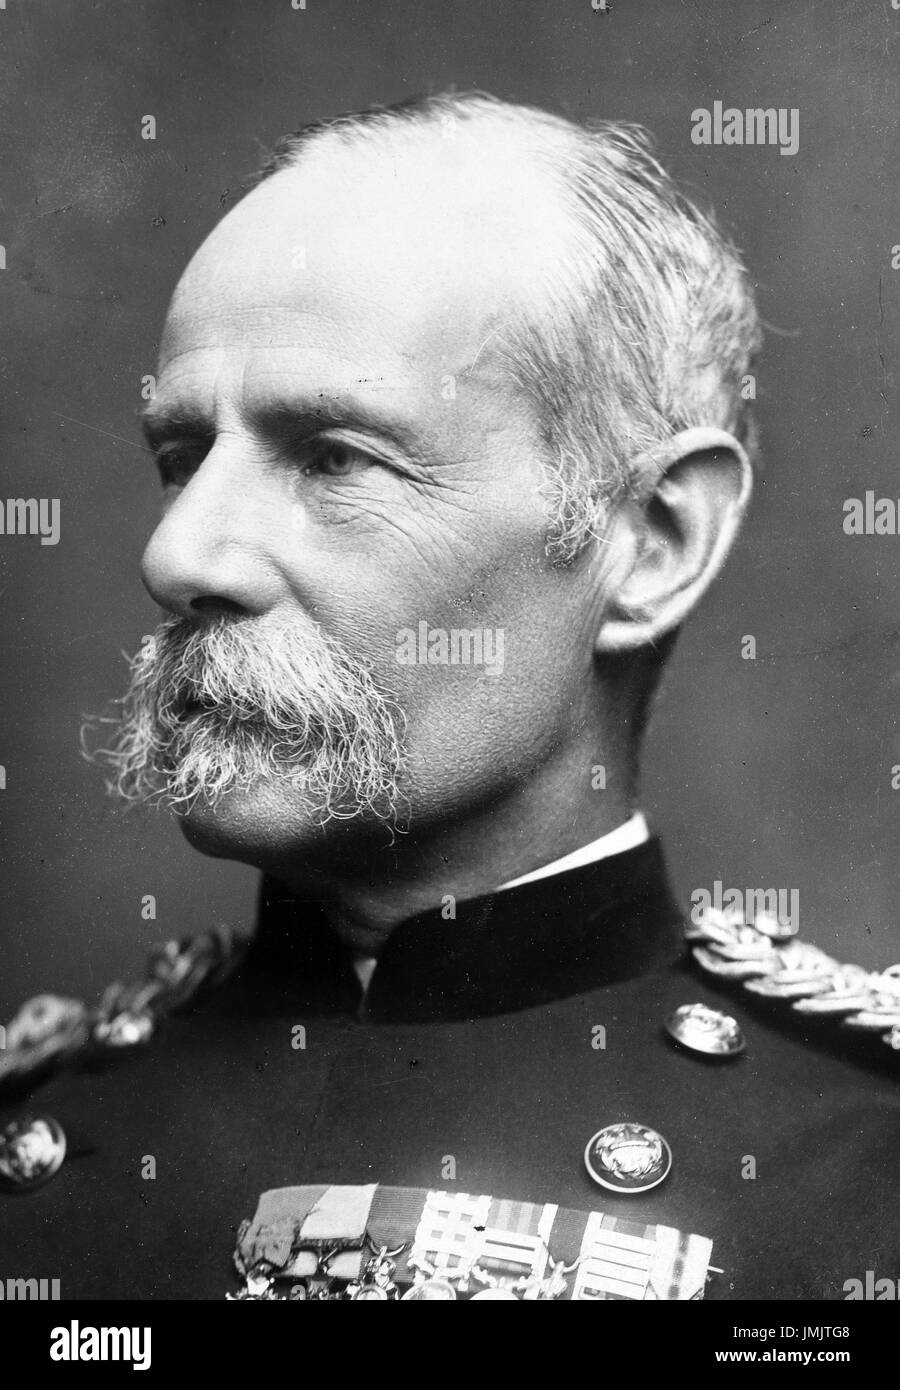 FREDERICK ROBERTS, !st Earl Roberts (1832-1914) British Army officer, in 1914 Stock Photo